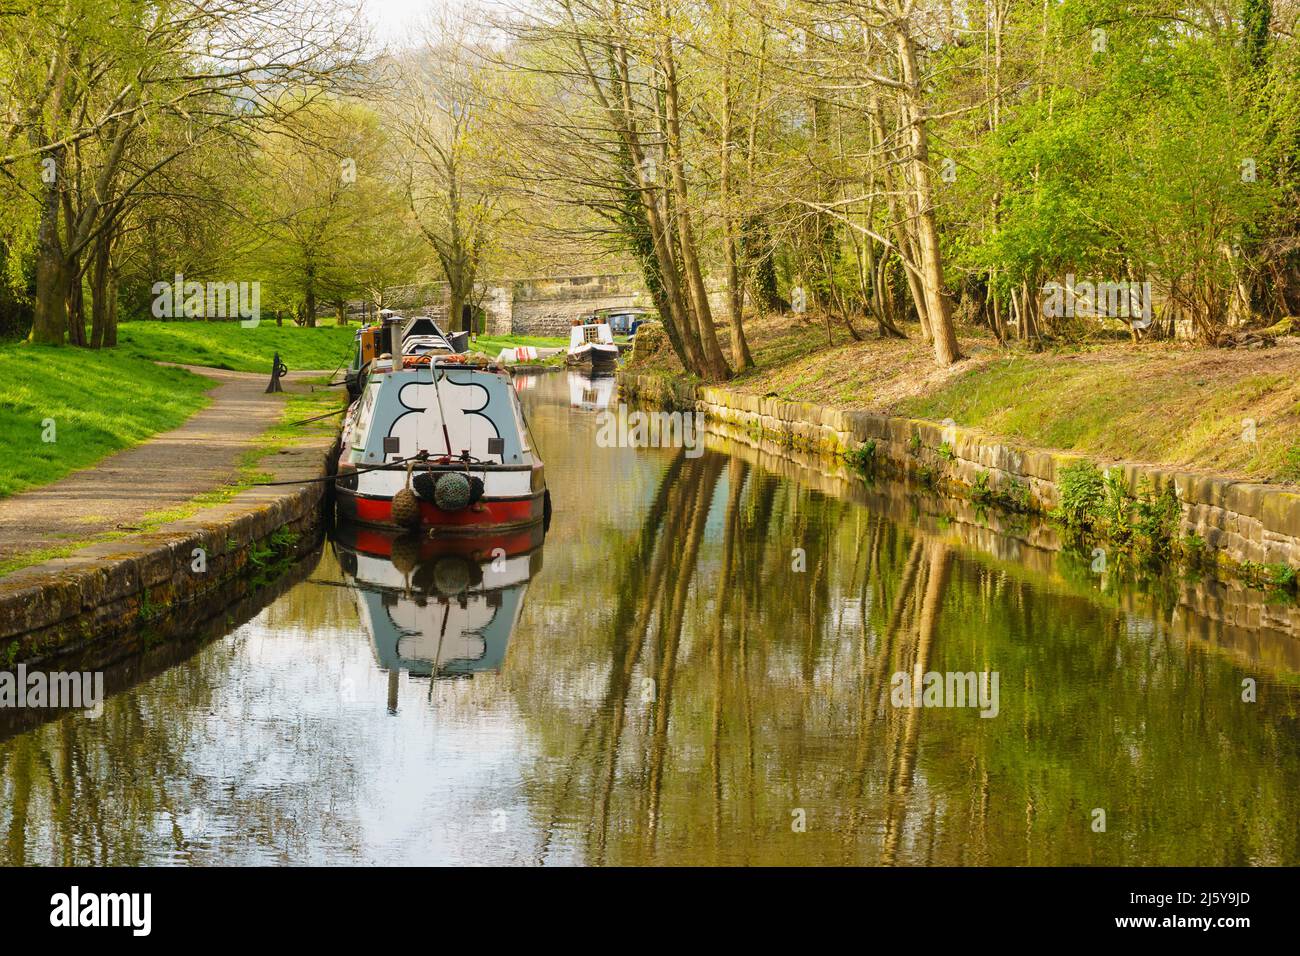 Narrowboats moored up on a tranquil leafy part of the Llangollen canal in the Trevor Basin at the Froncysyllte aqueduct on the inland waterway network Stock Photo